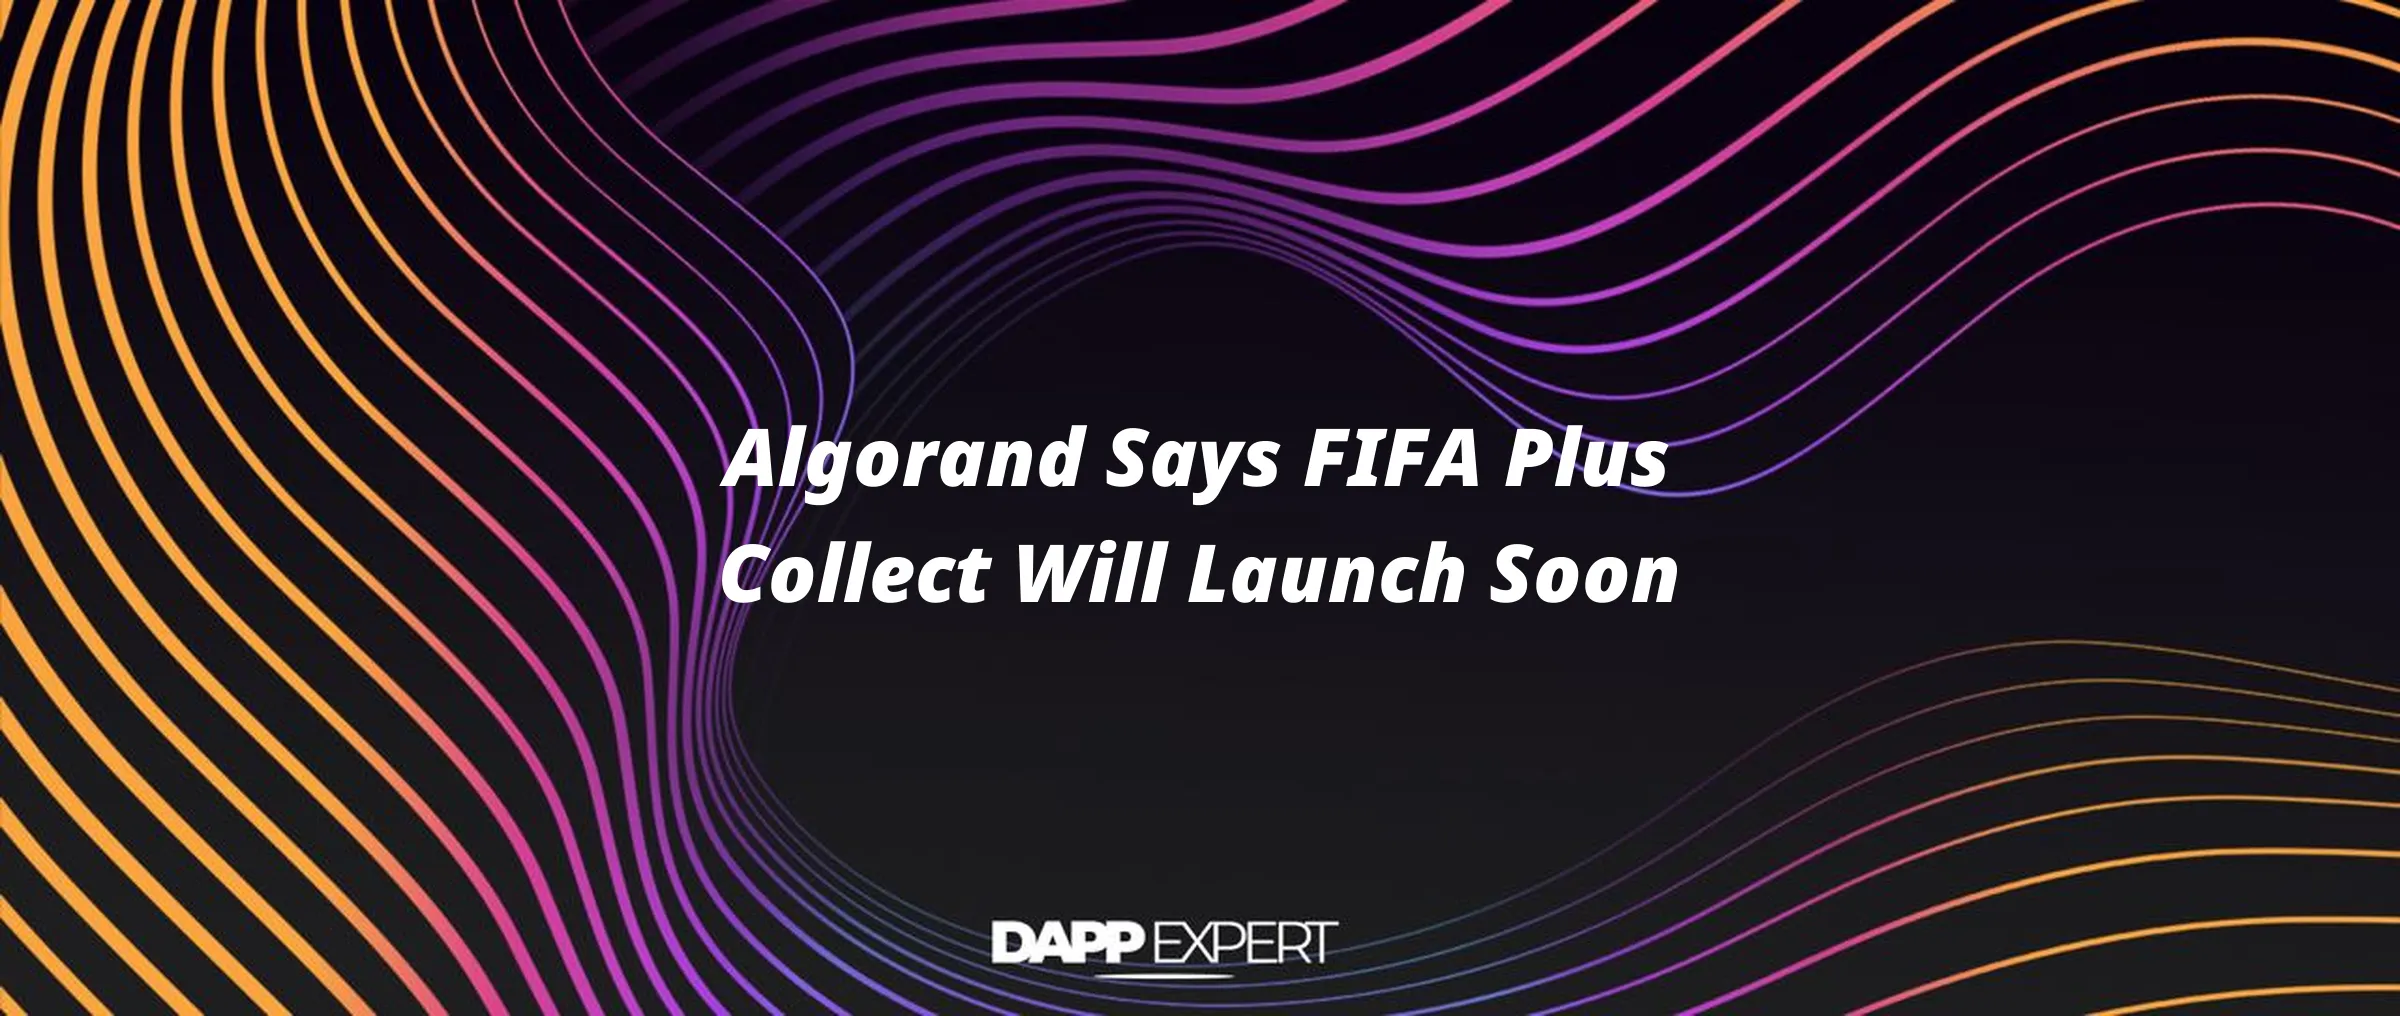 Algorand Says FIFA Plus Collect Will Launch Soon